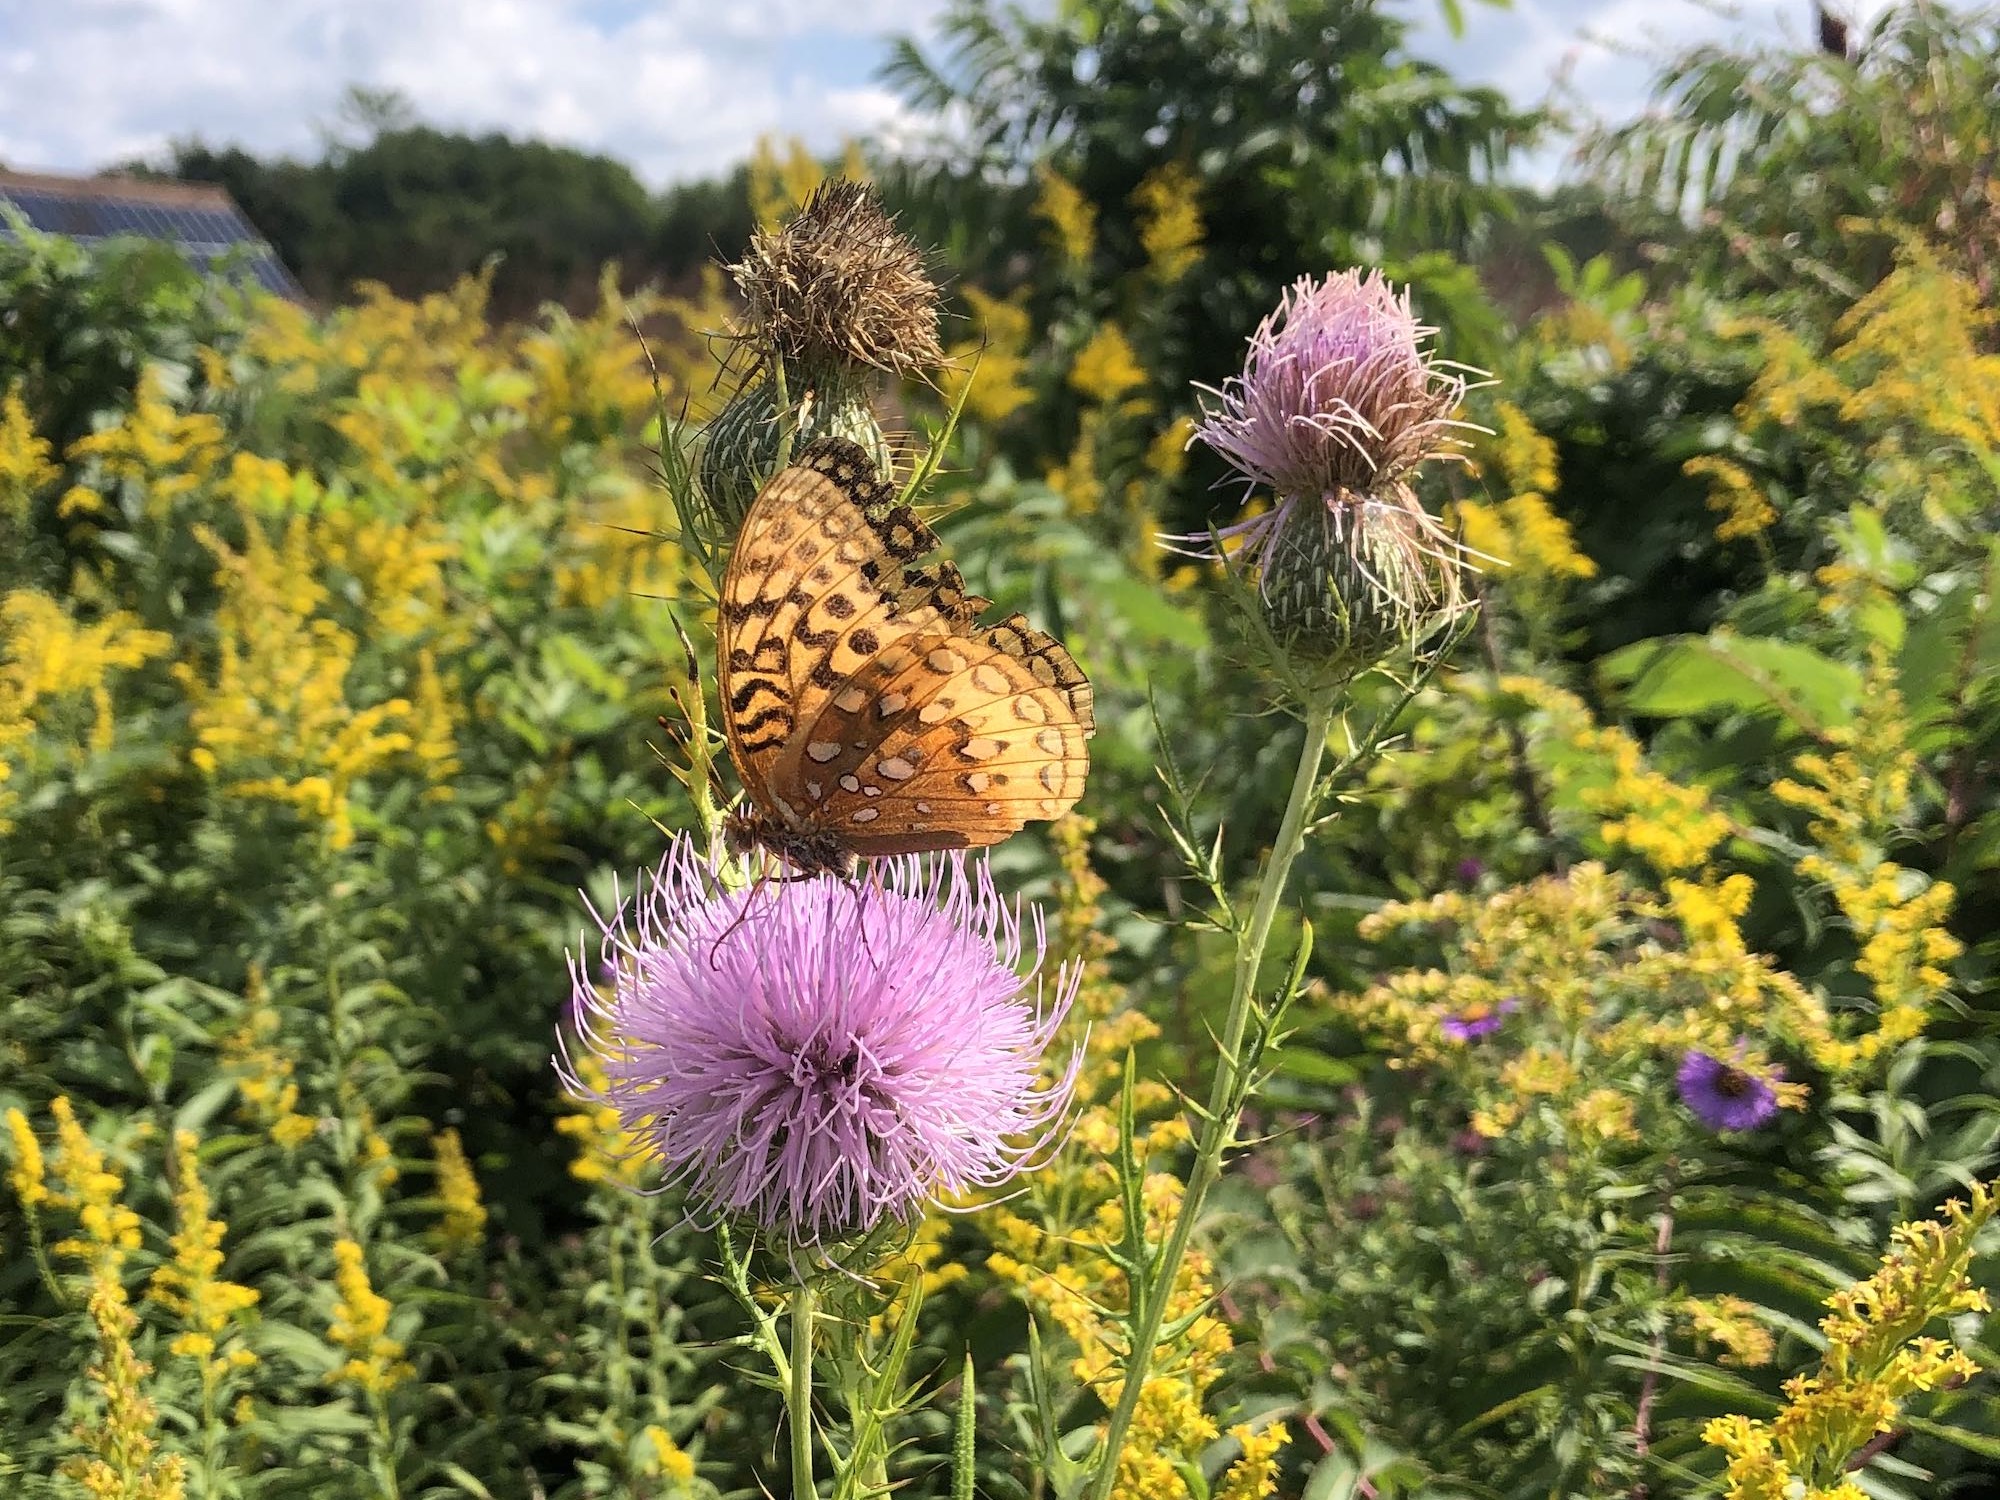 Aphrodite Fritillary (or Great spangled fritillary) butterfly on Field Thistle in UW Arboretum Curtis Prairie in Madison, Wisconsin on September 7, 2022.